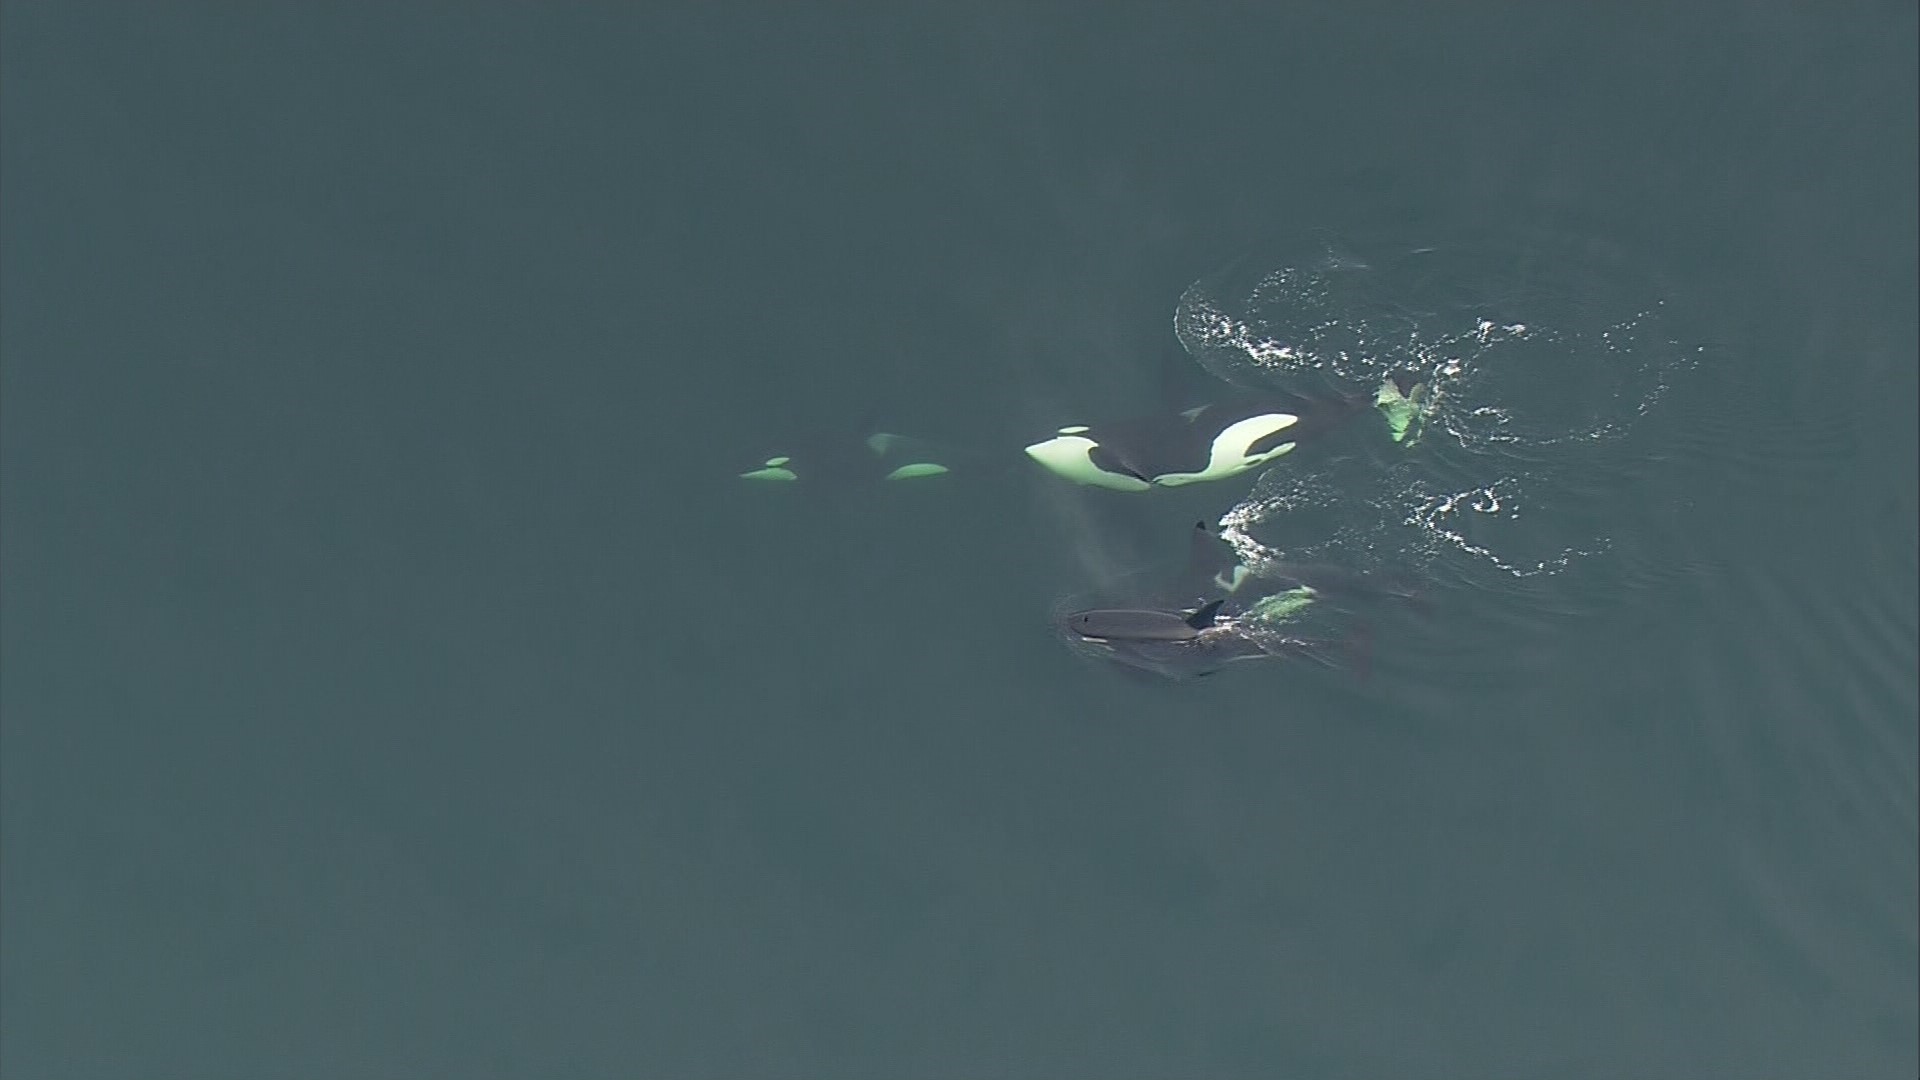 SkyKING spotted a group of Killer Whales in Puget Sound near West Seattle on Thursday, January 10, 2019.